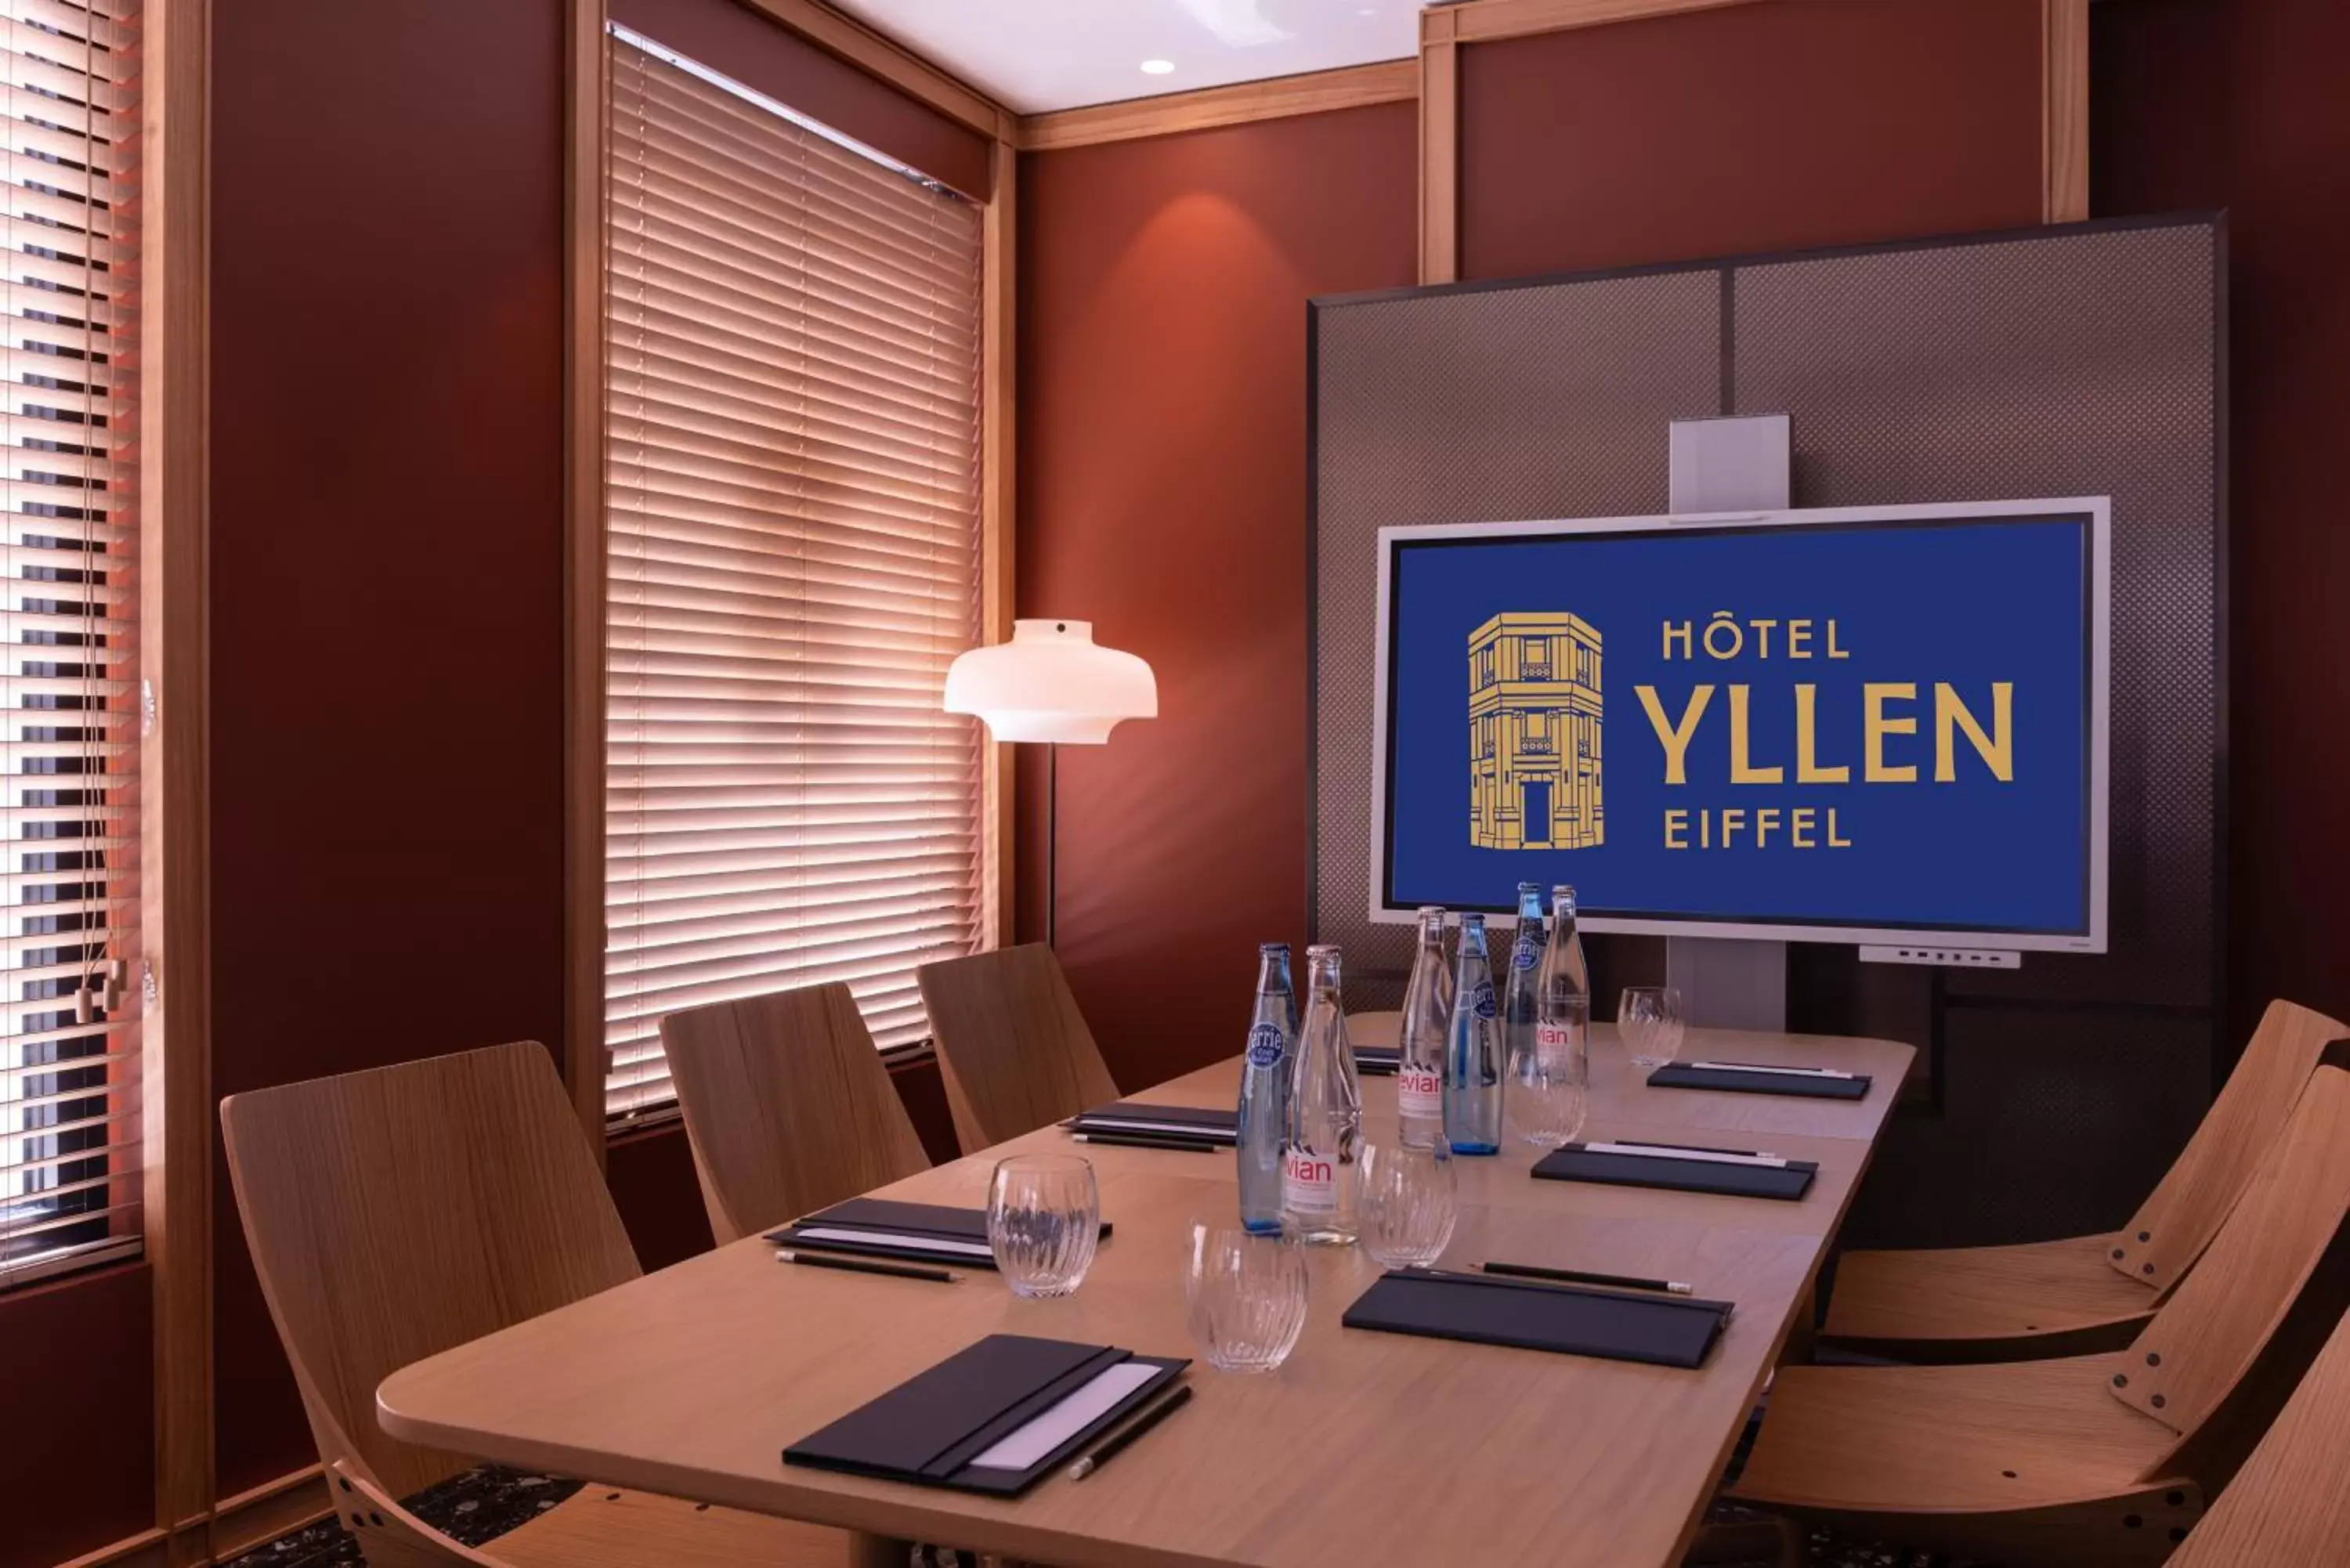 Meeting/conference room in Hotel Yllen Eiffel